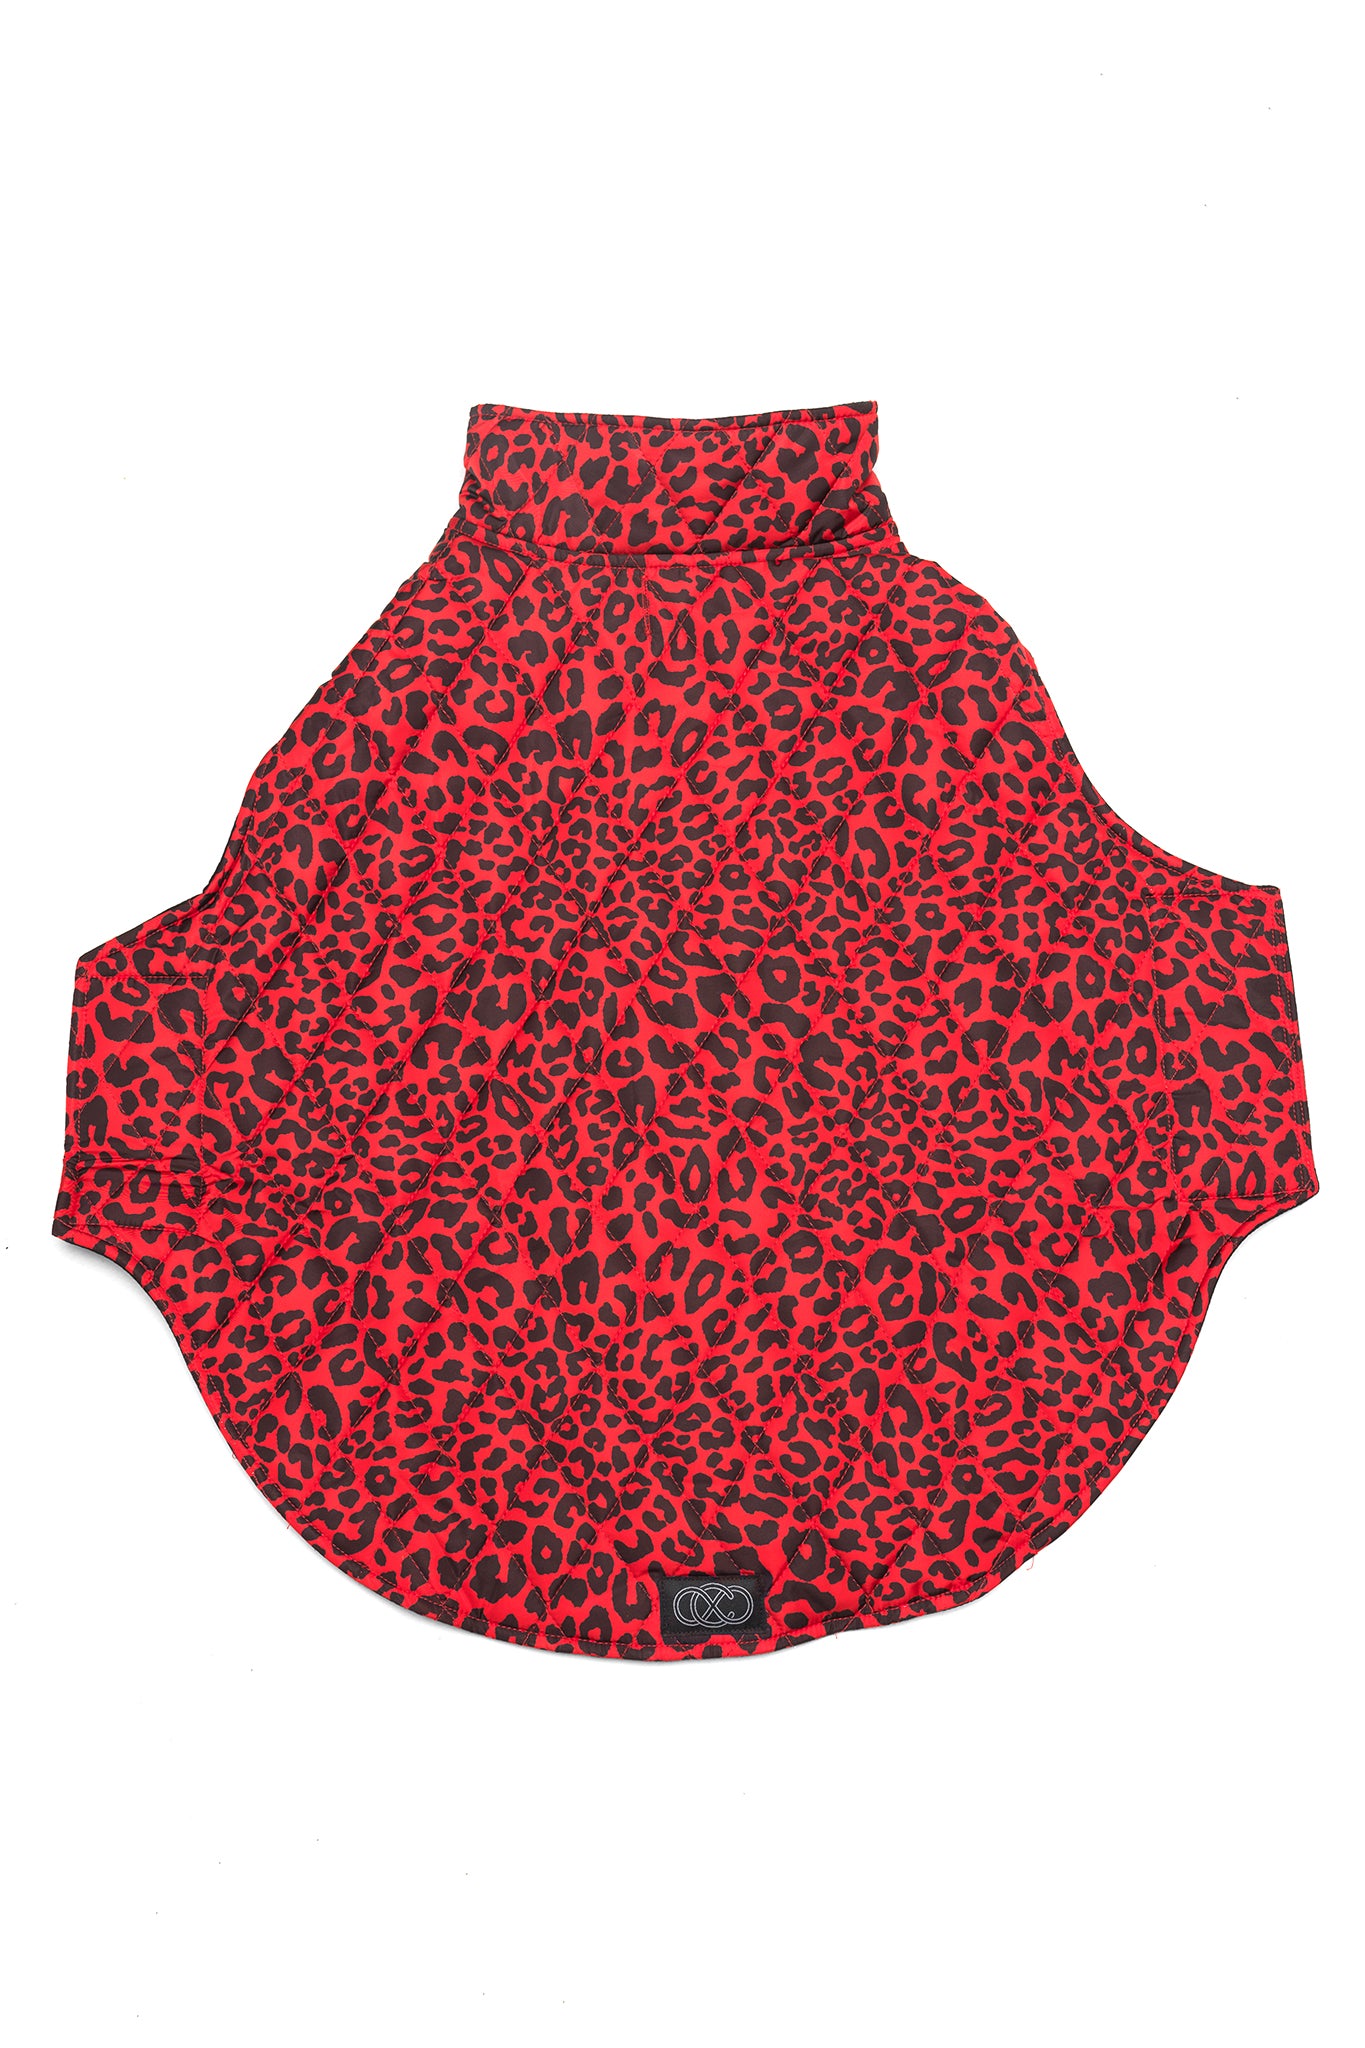 Animal Instinct Dog Jacket in Racy Red laid on floor to show the exterior view of the jacket when opened.